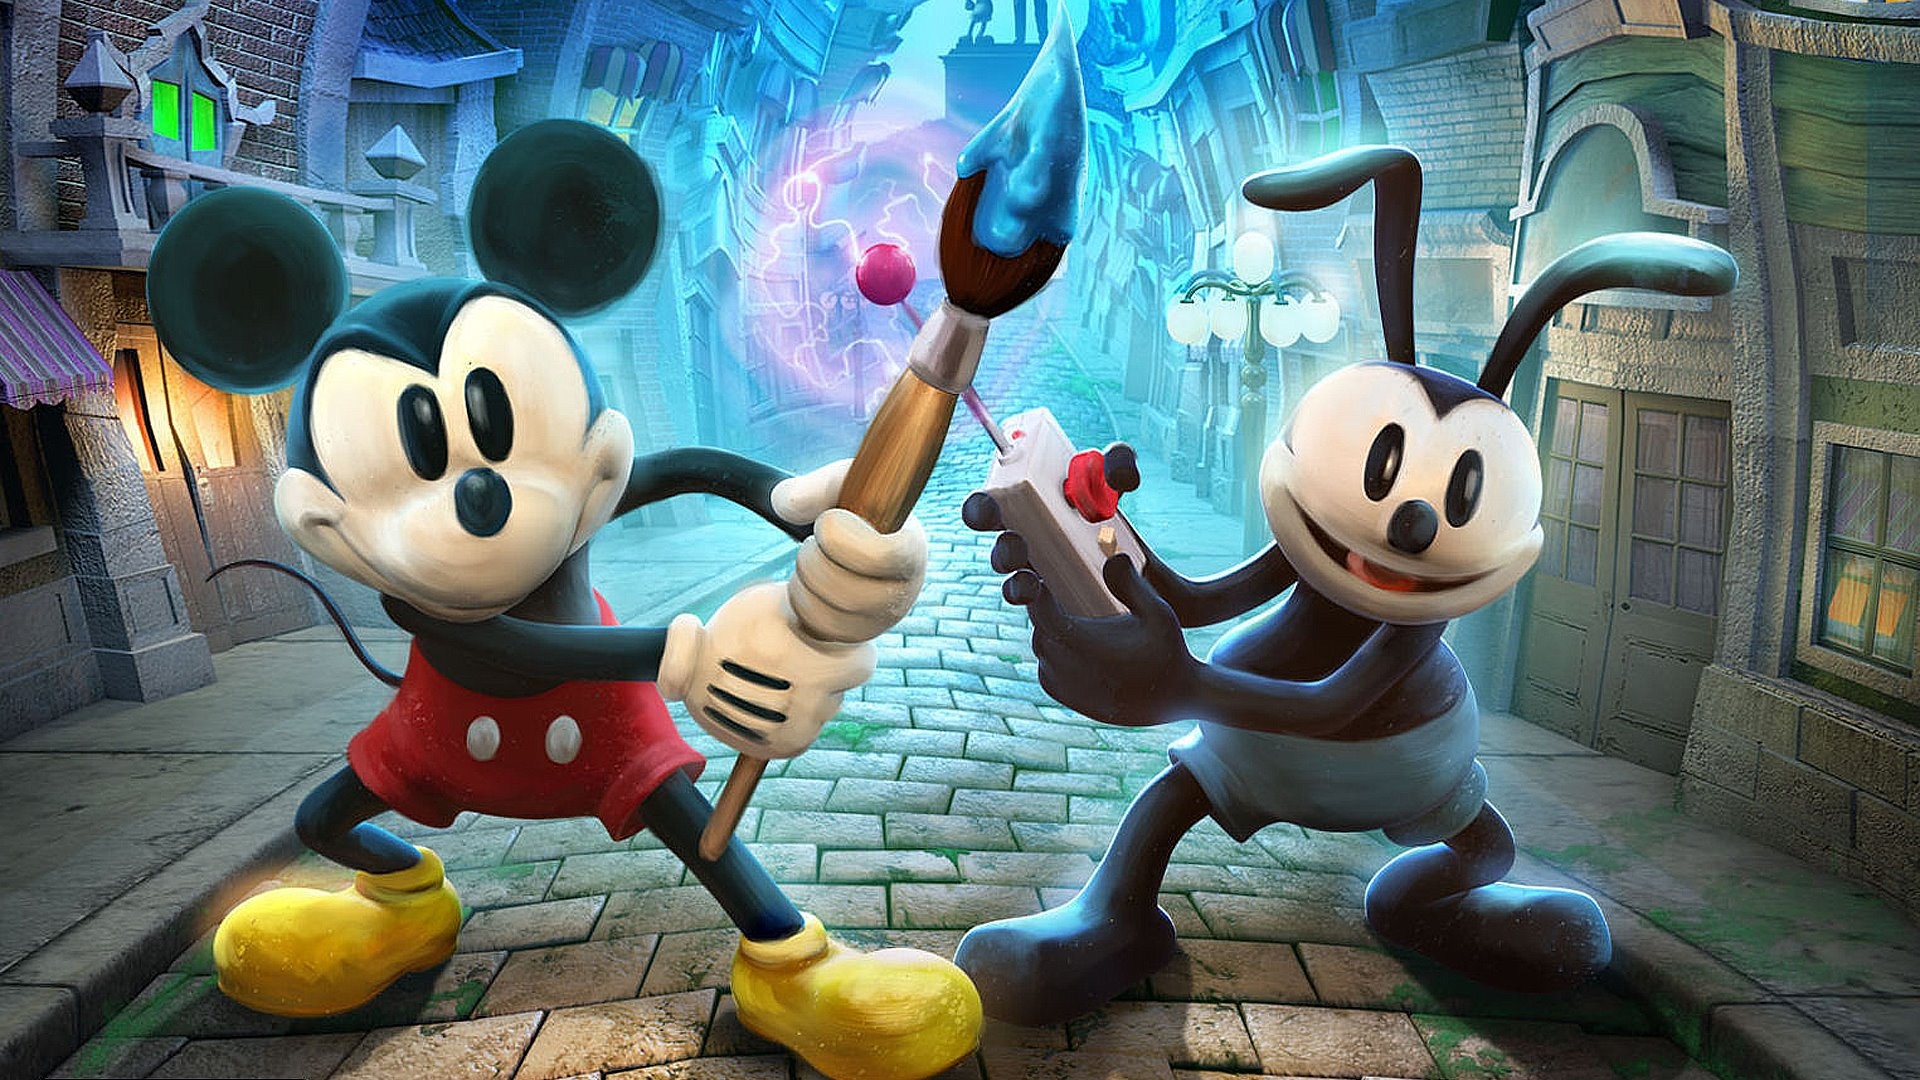 Oswald the Lucky Rabbit, Epic Mickey 2, Download wallpapers, Epic background, 1920x1080 Full HD Desktop